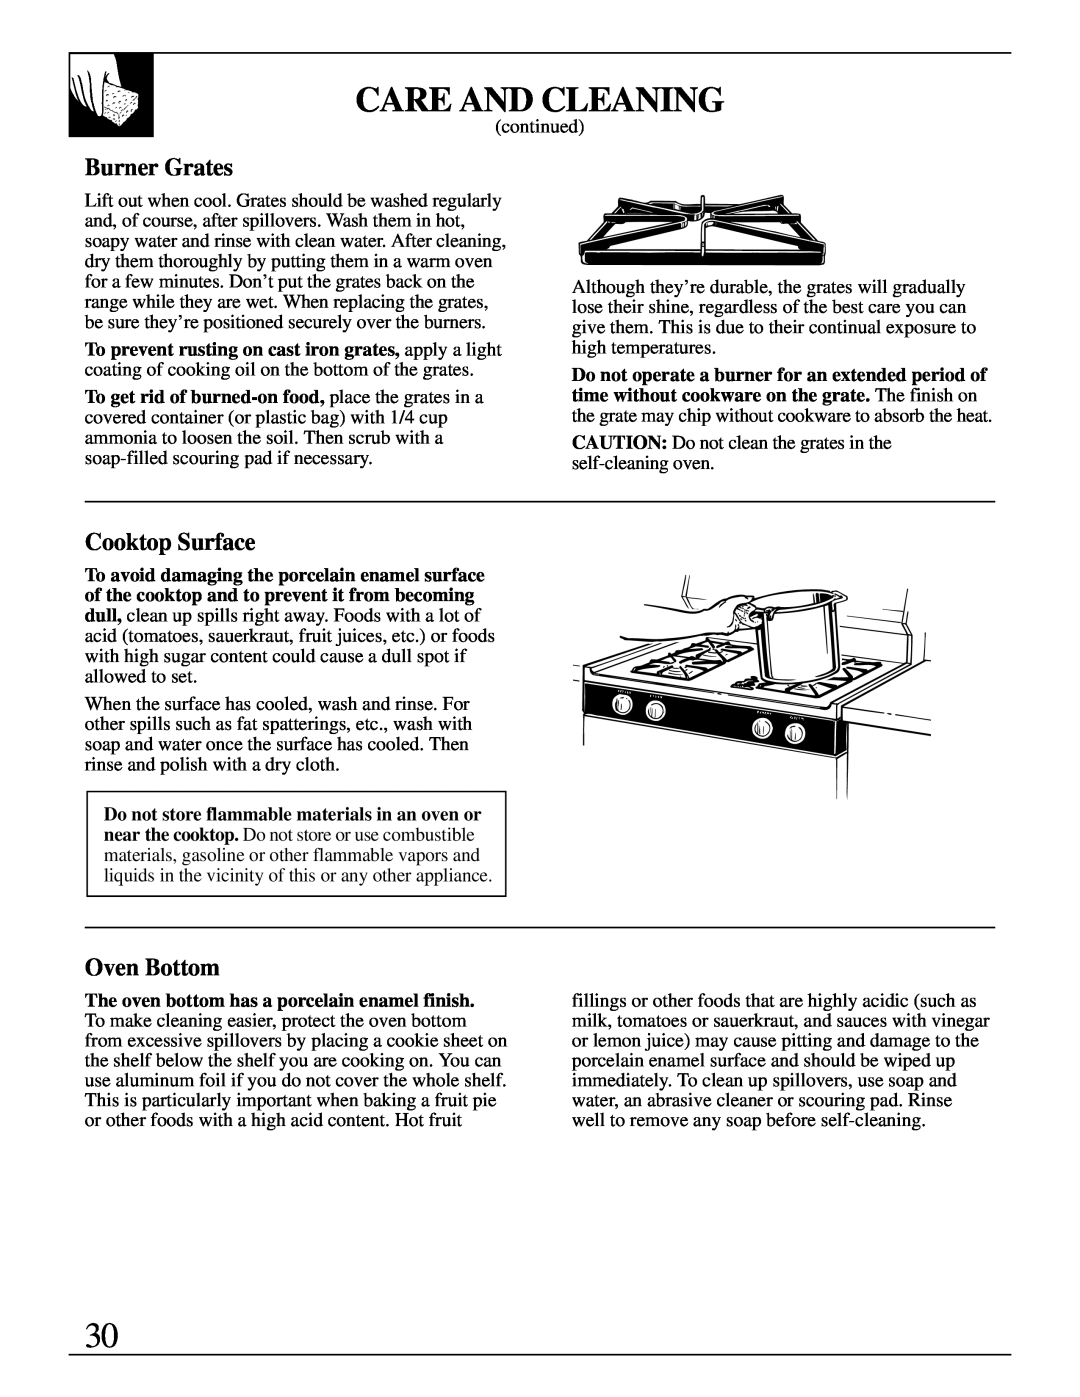 Hotpoint RGB744 installation instructions Burner Grates, Cooktop Surface, Oven Bottom, Care And Cleaning 